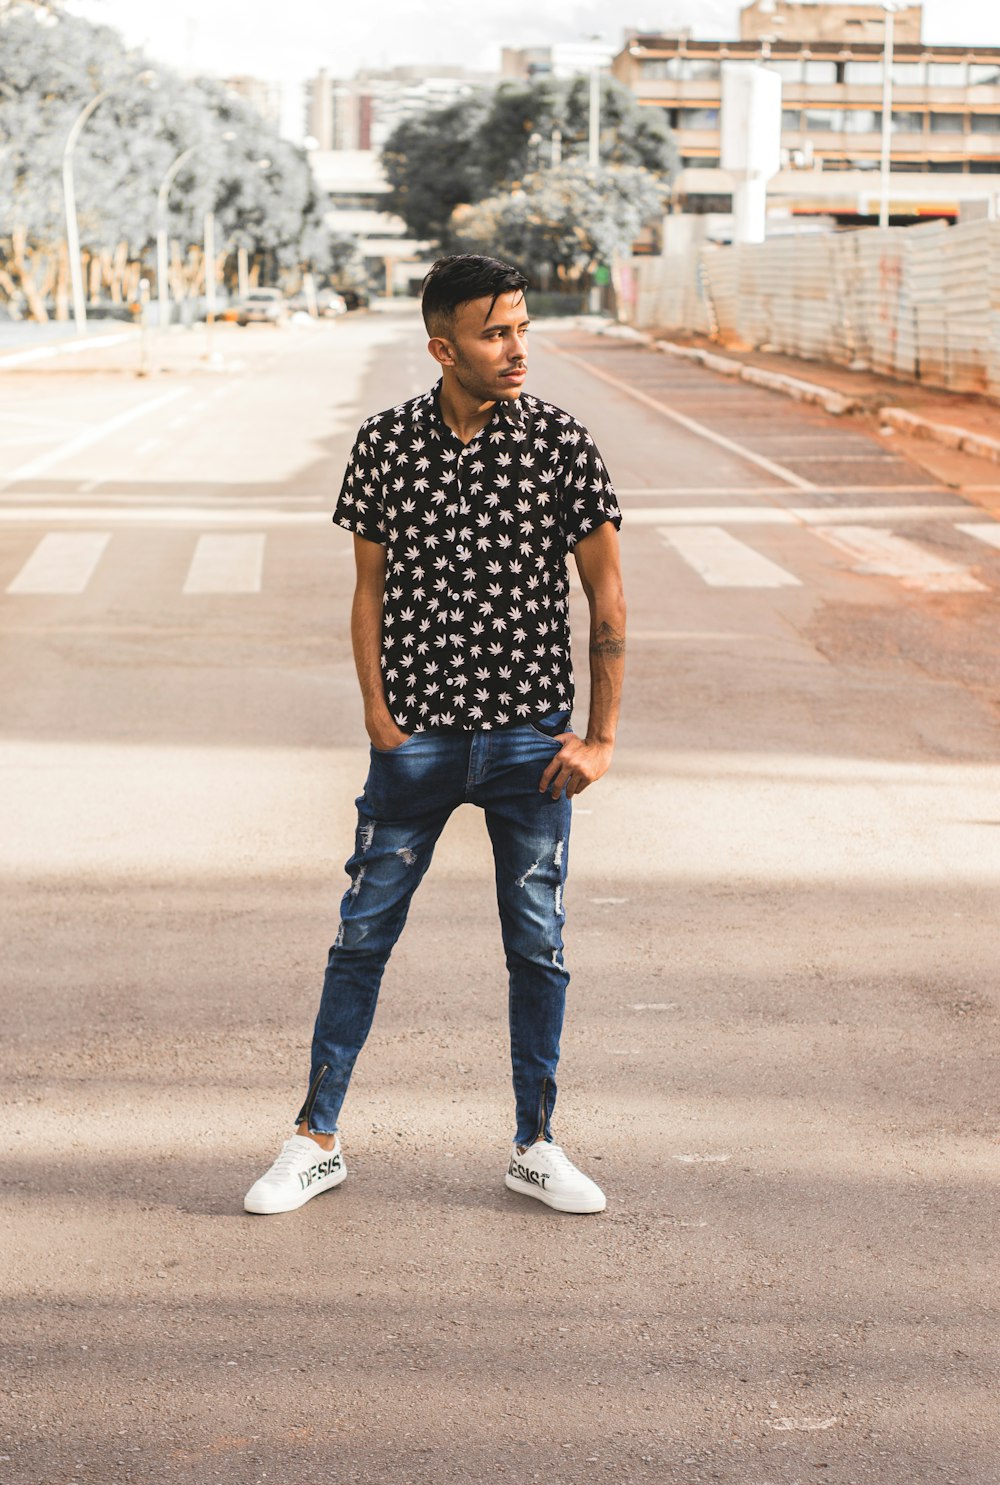 Man in black and white polka dot shirt and blue denim jeans standing on  road during photo – Free Footwear Image on Unsplash